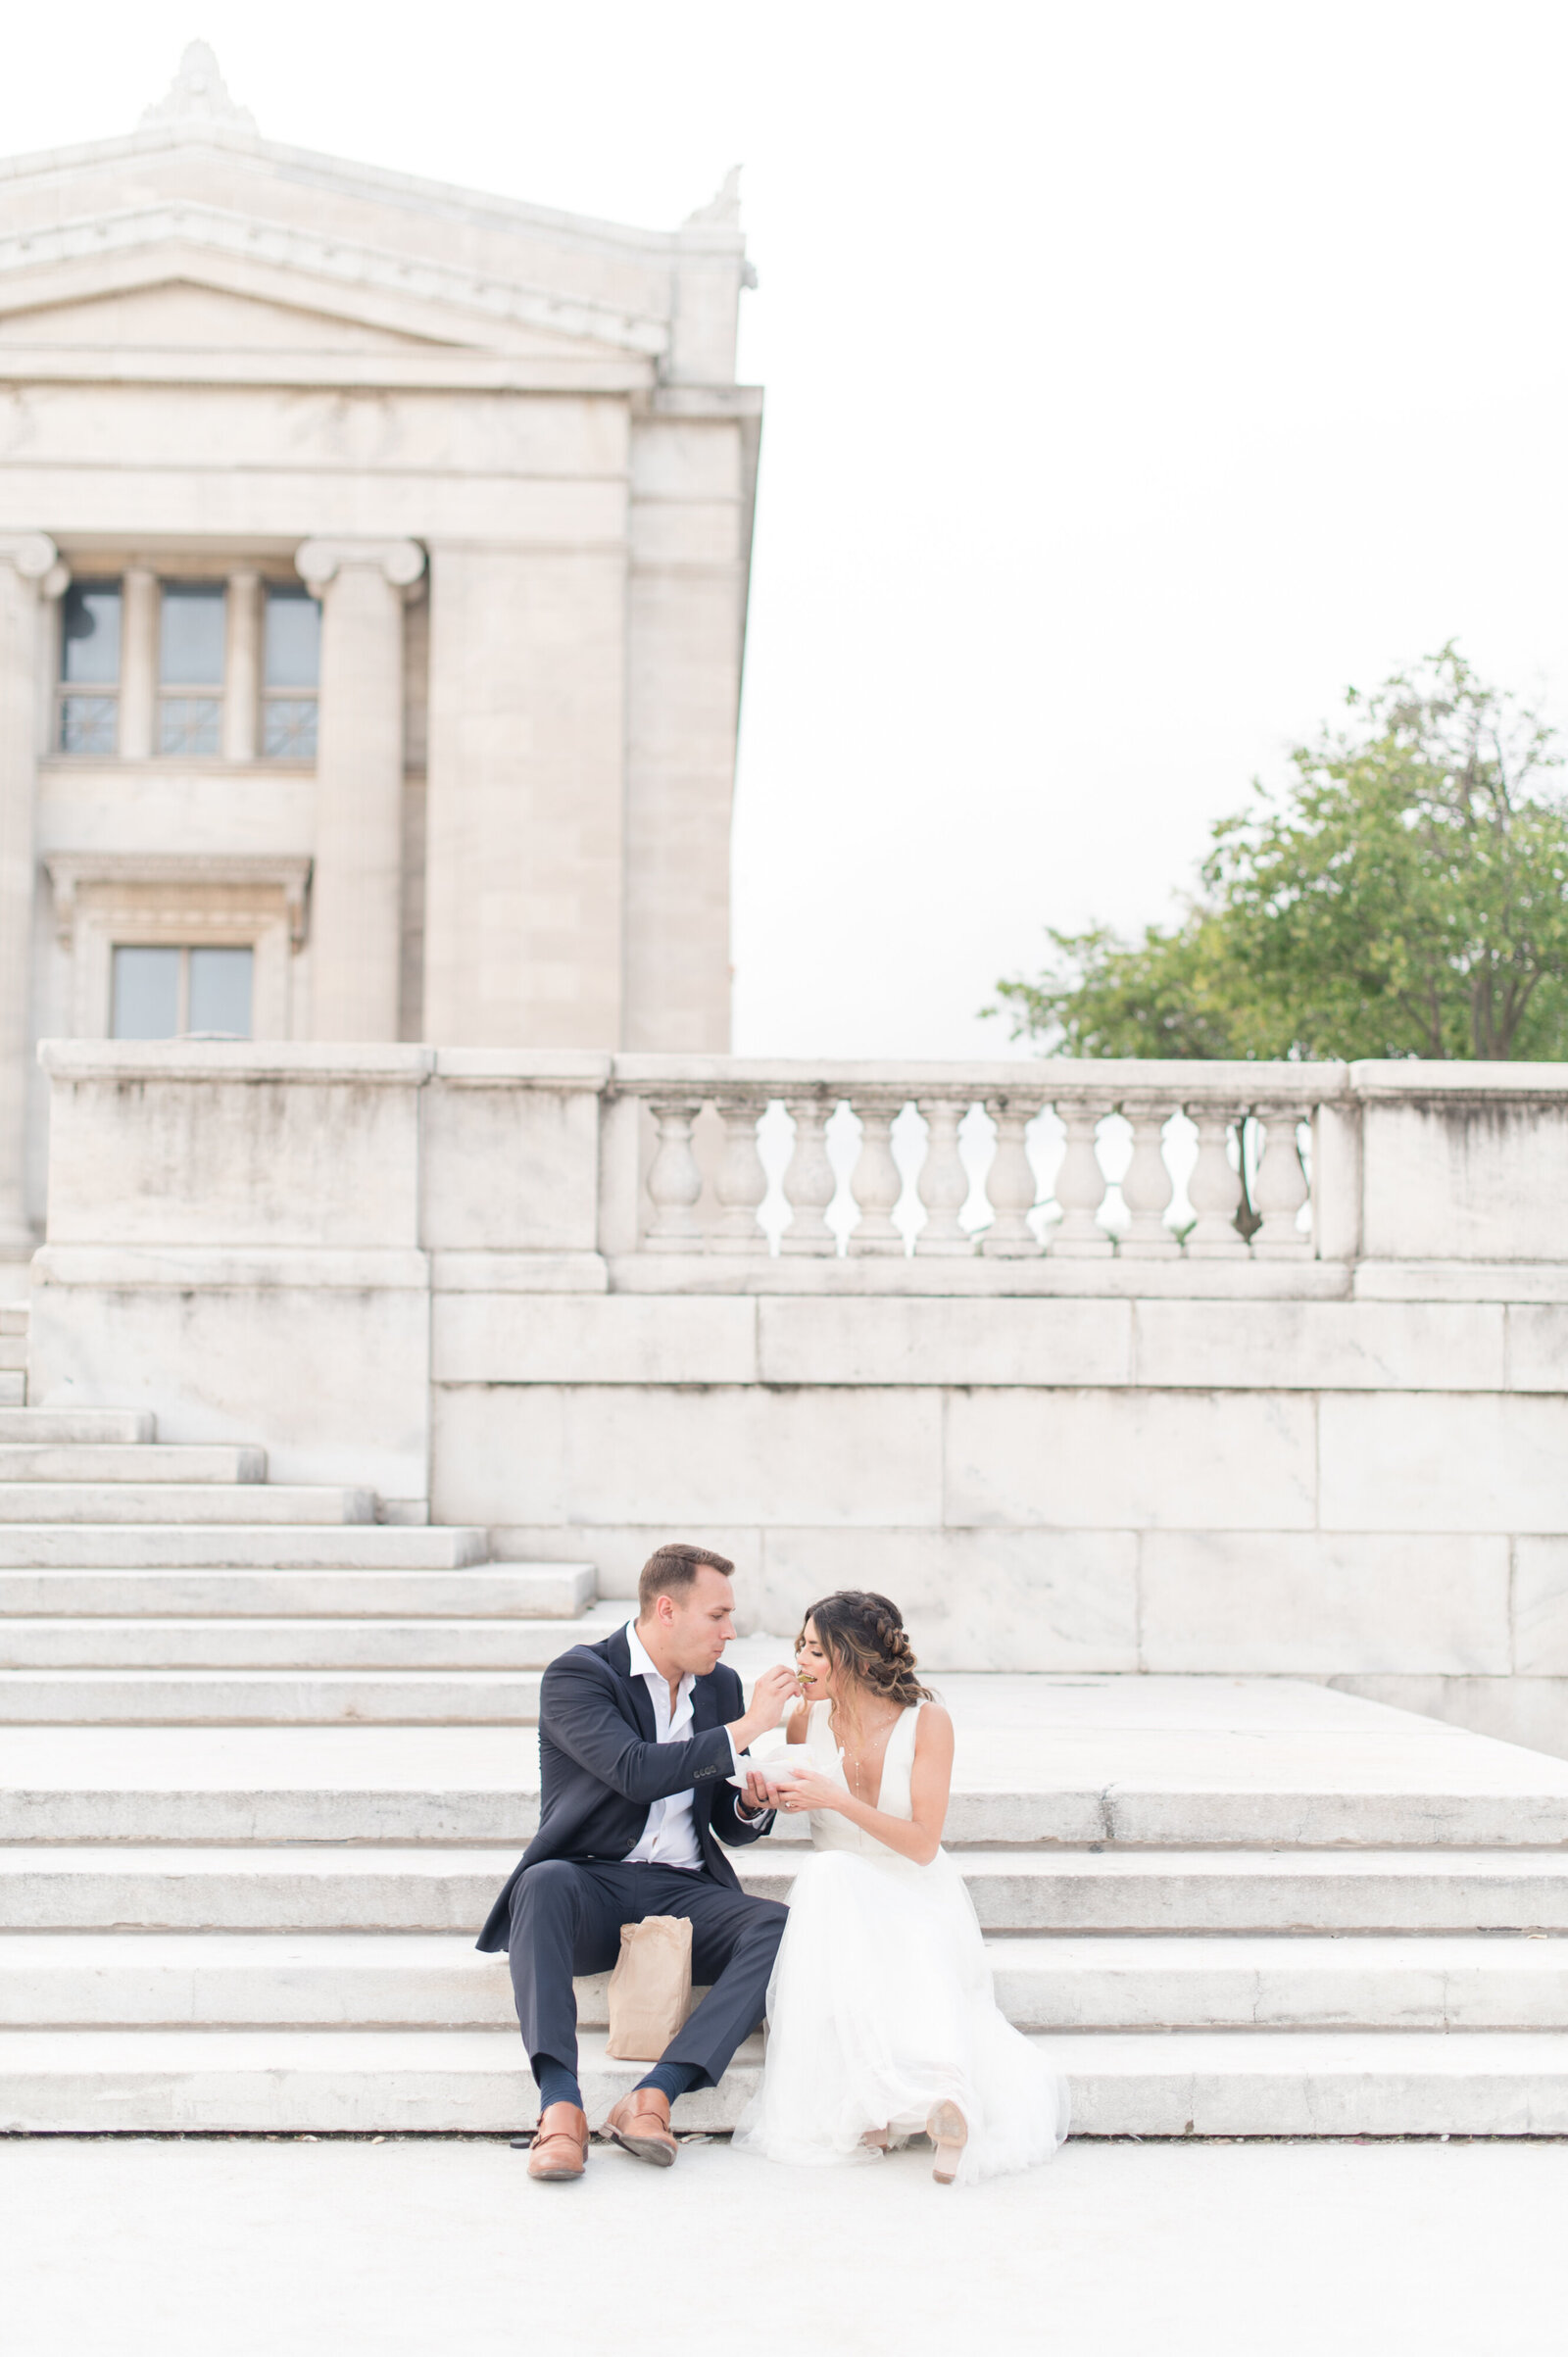 chicago rookery building and board of trade and museum campus wedding photos-8301